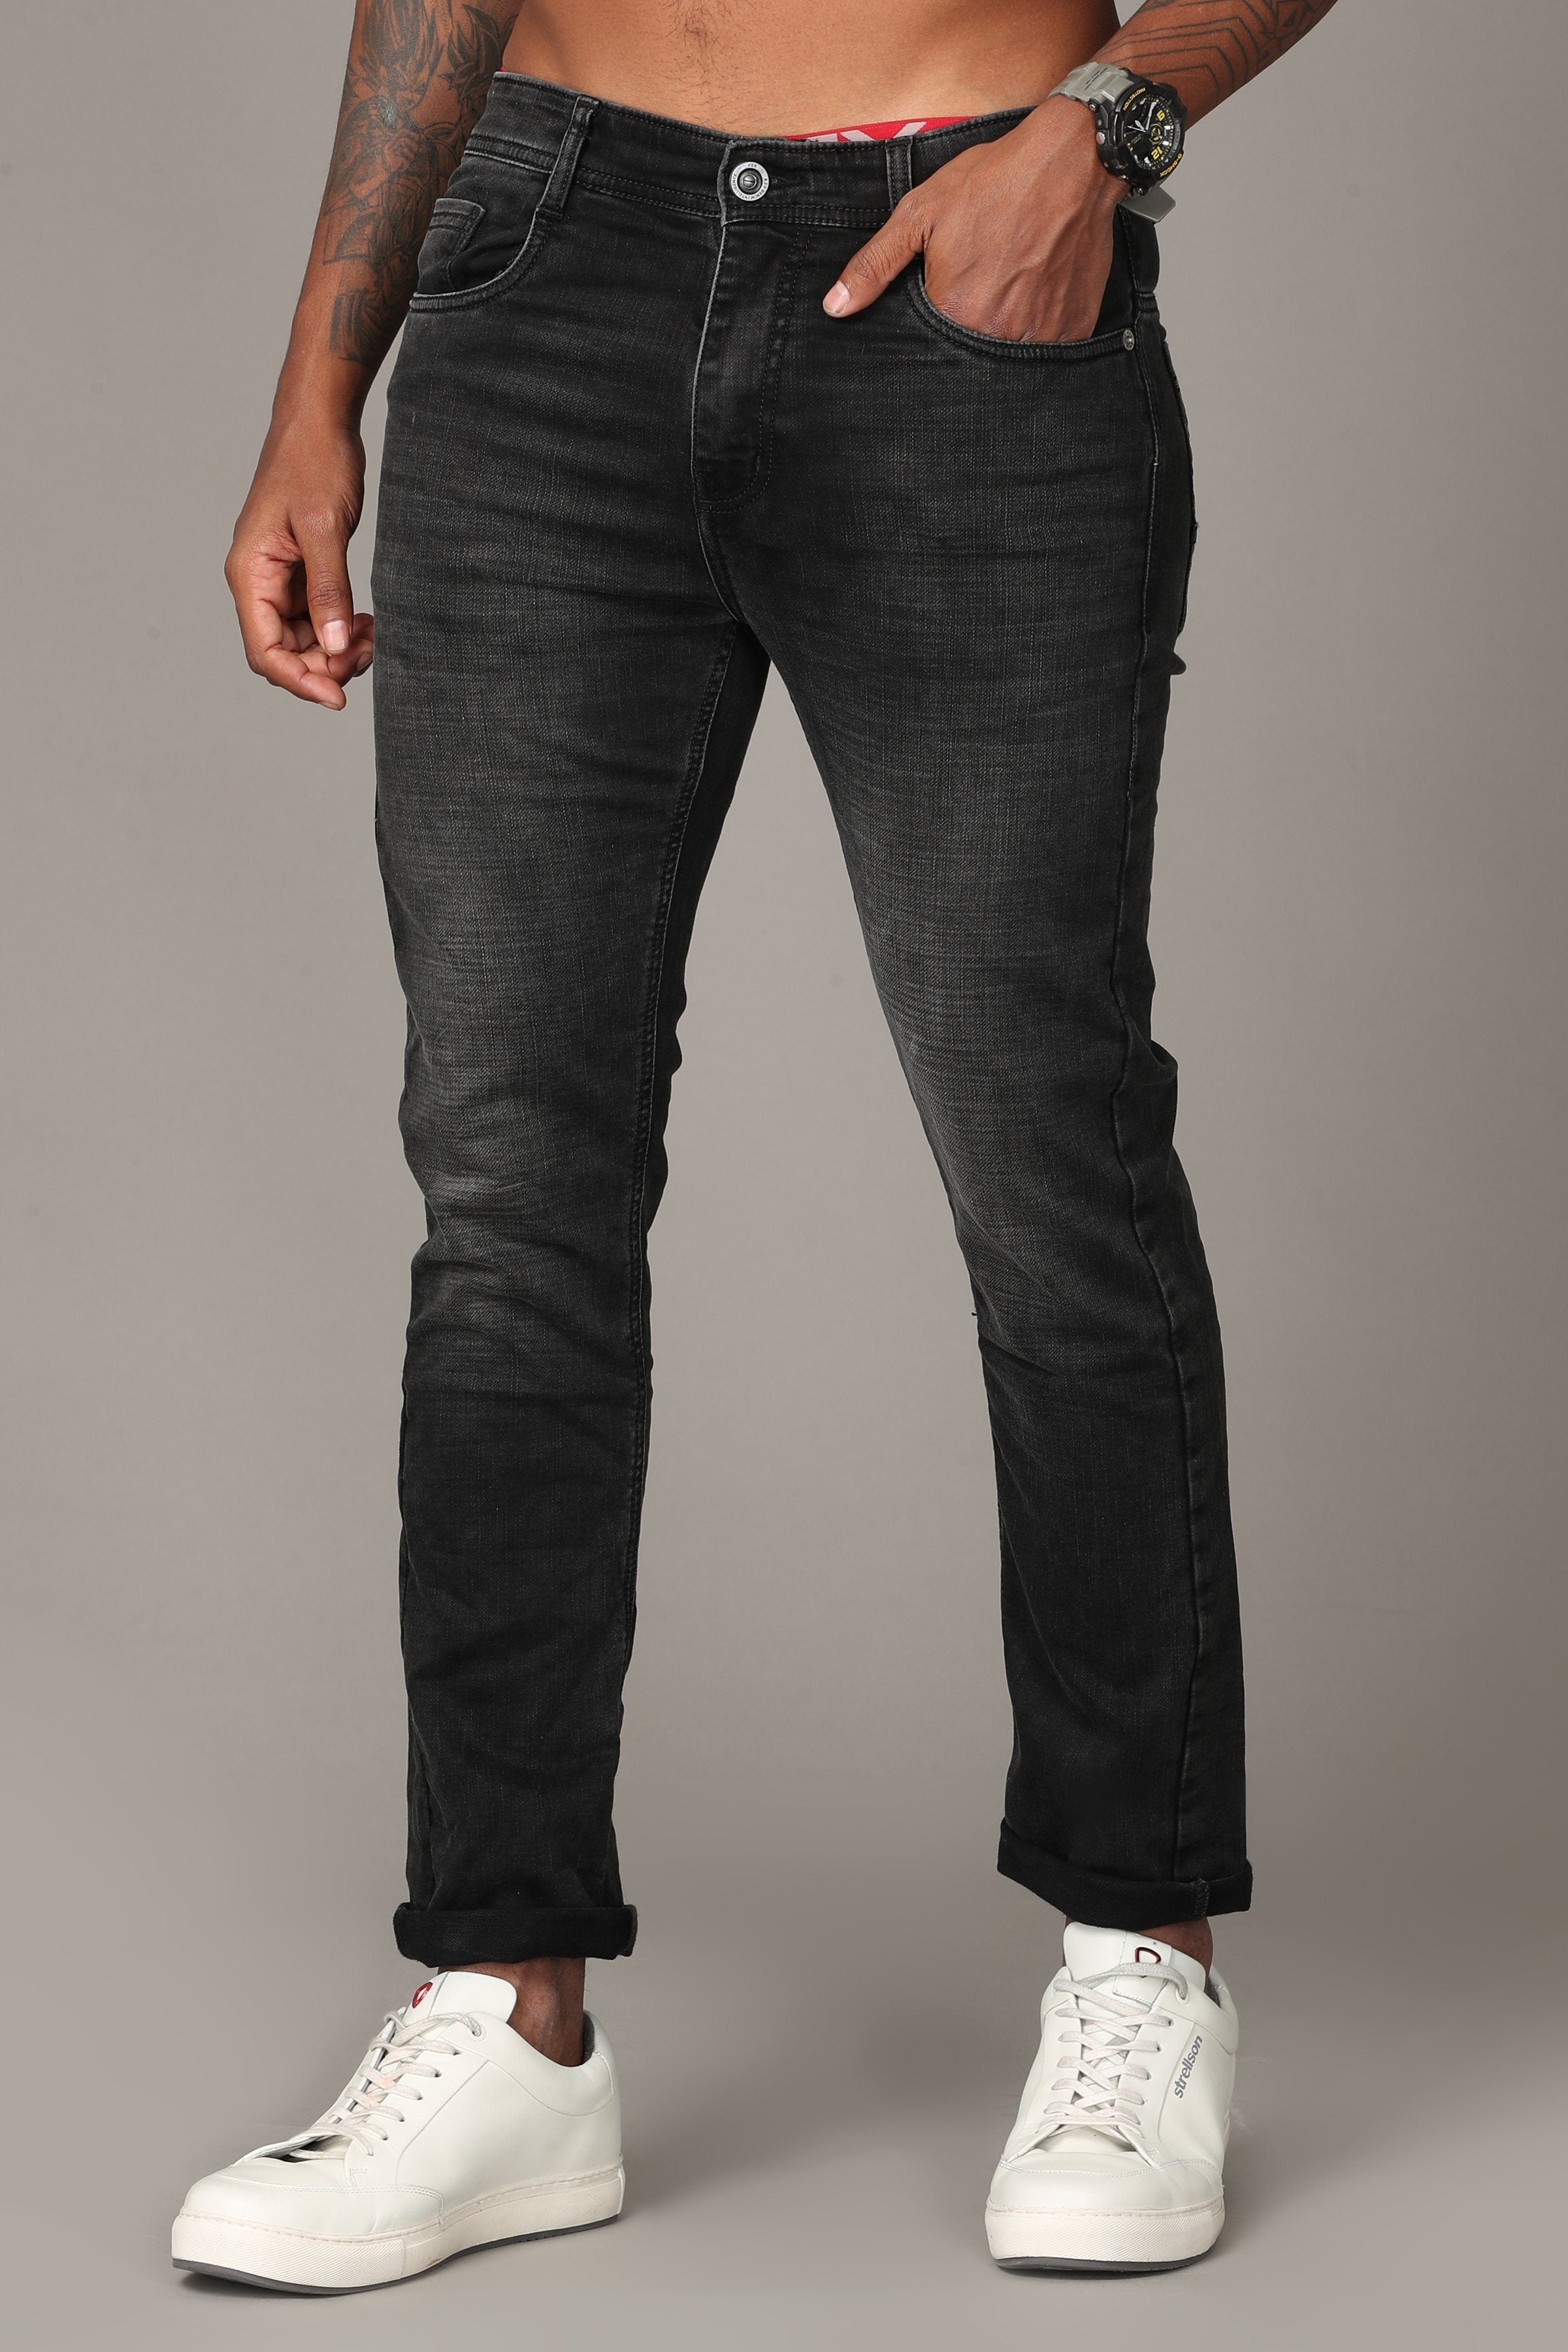 Strech Fit Black Denim Jeans in Delhi at best price by Arsh Traders -  Justdial